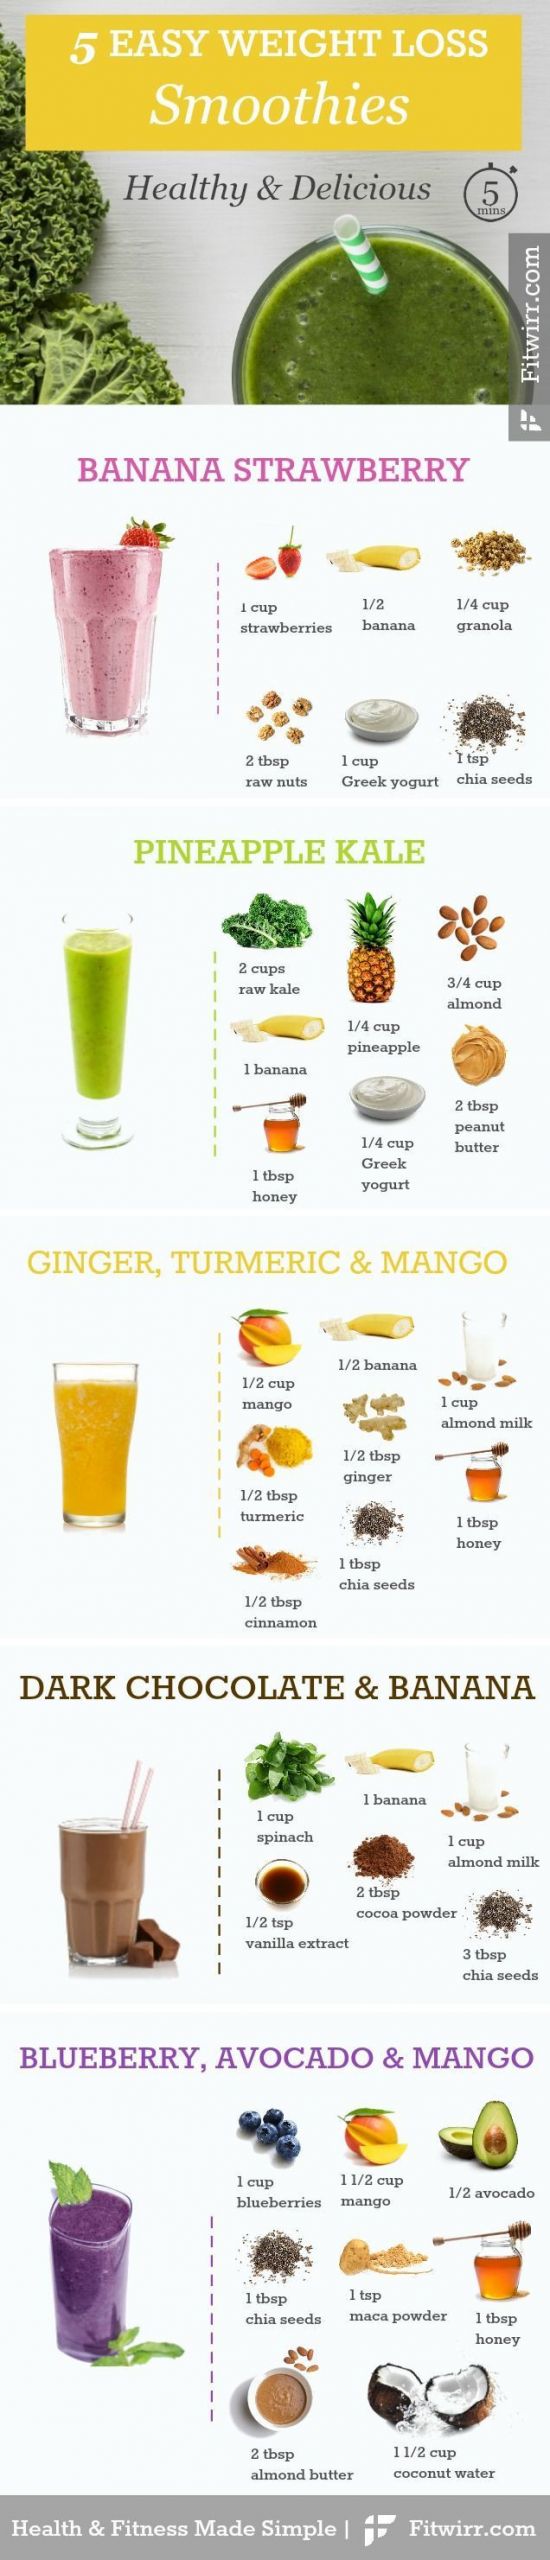 Smoothies Recipes To Lose Weight Fast
 29 best images about low carb t before & after on